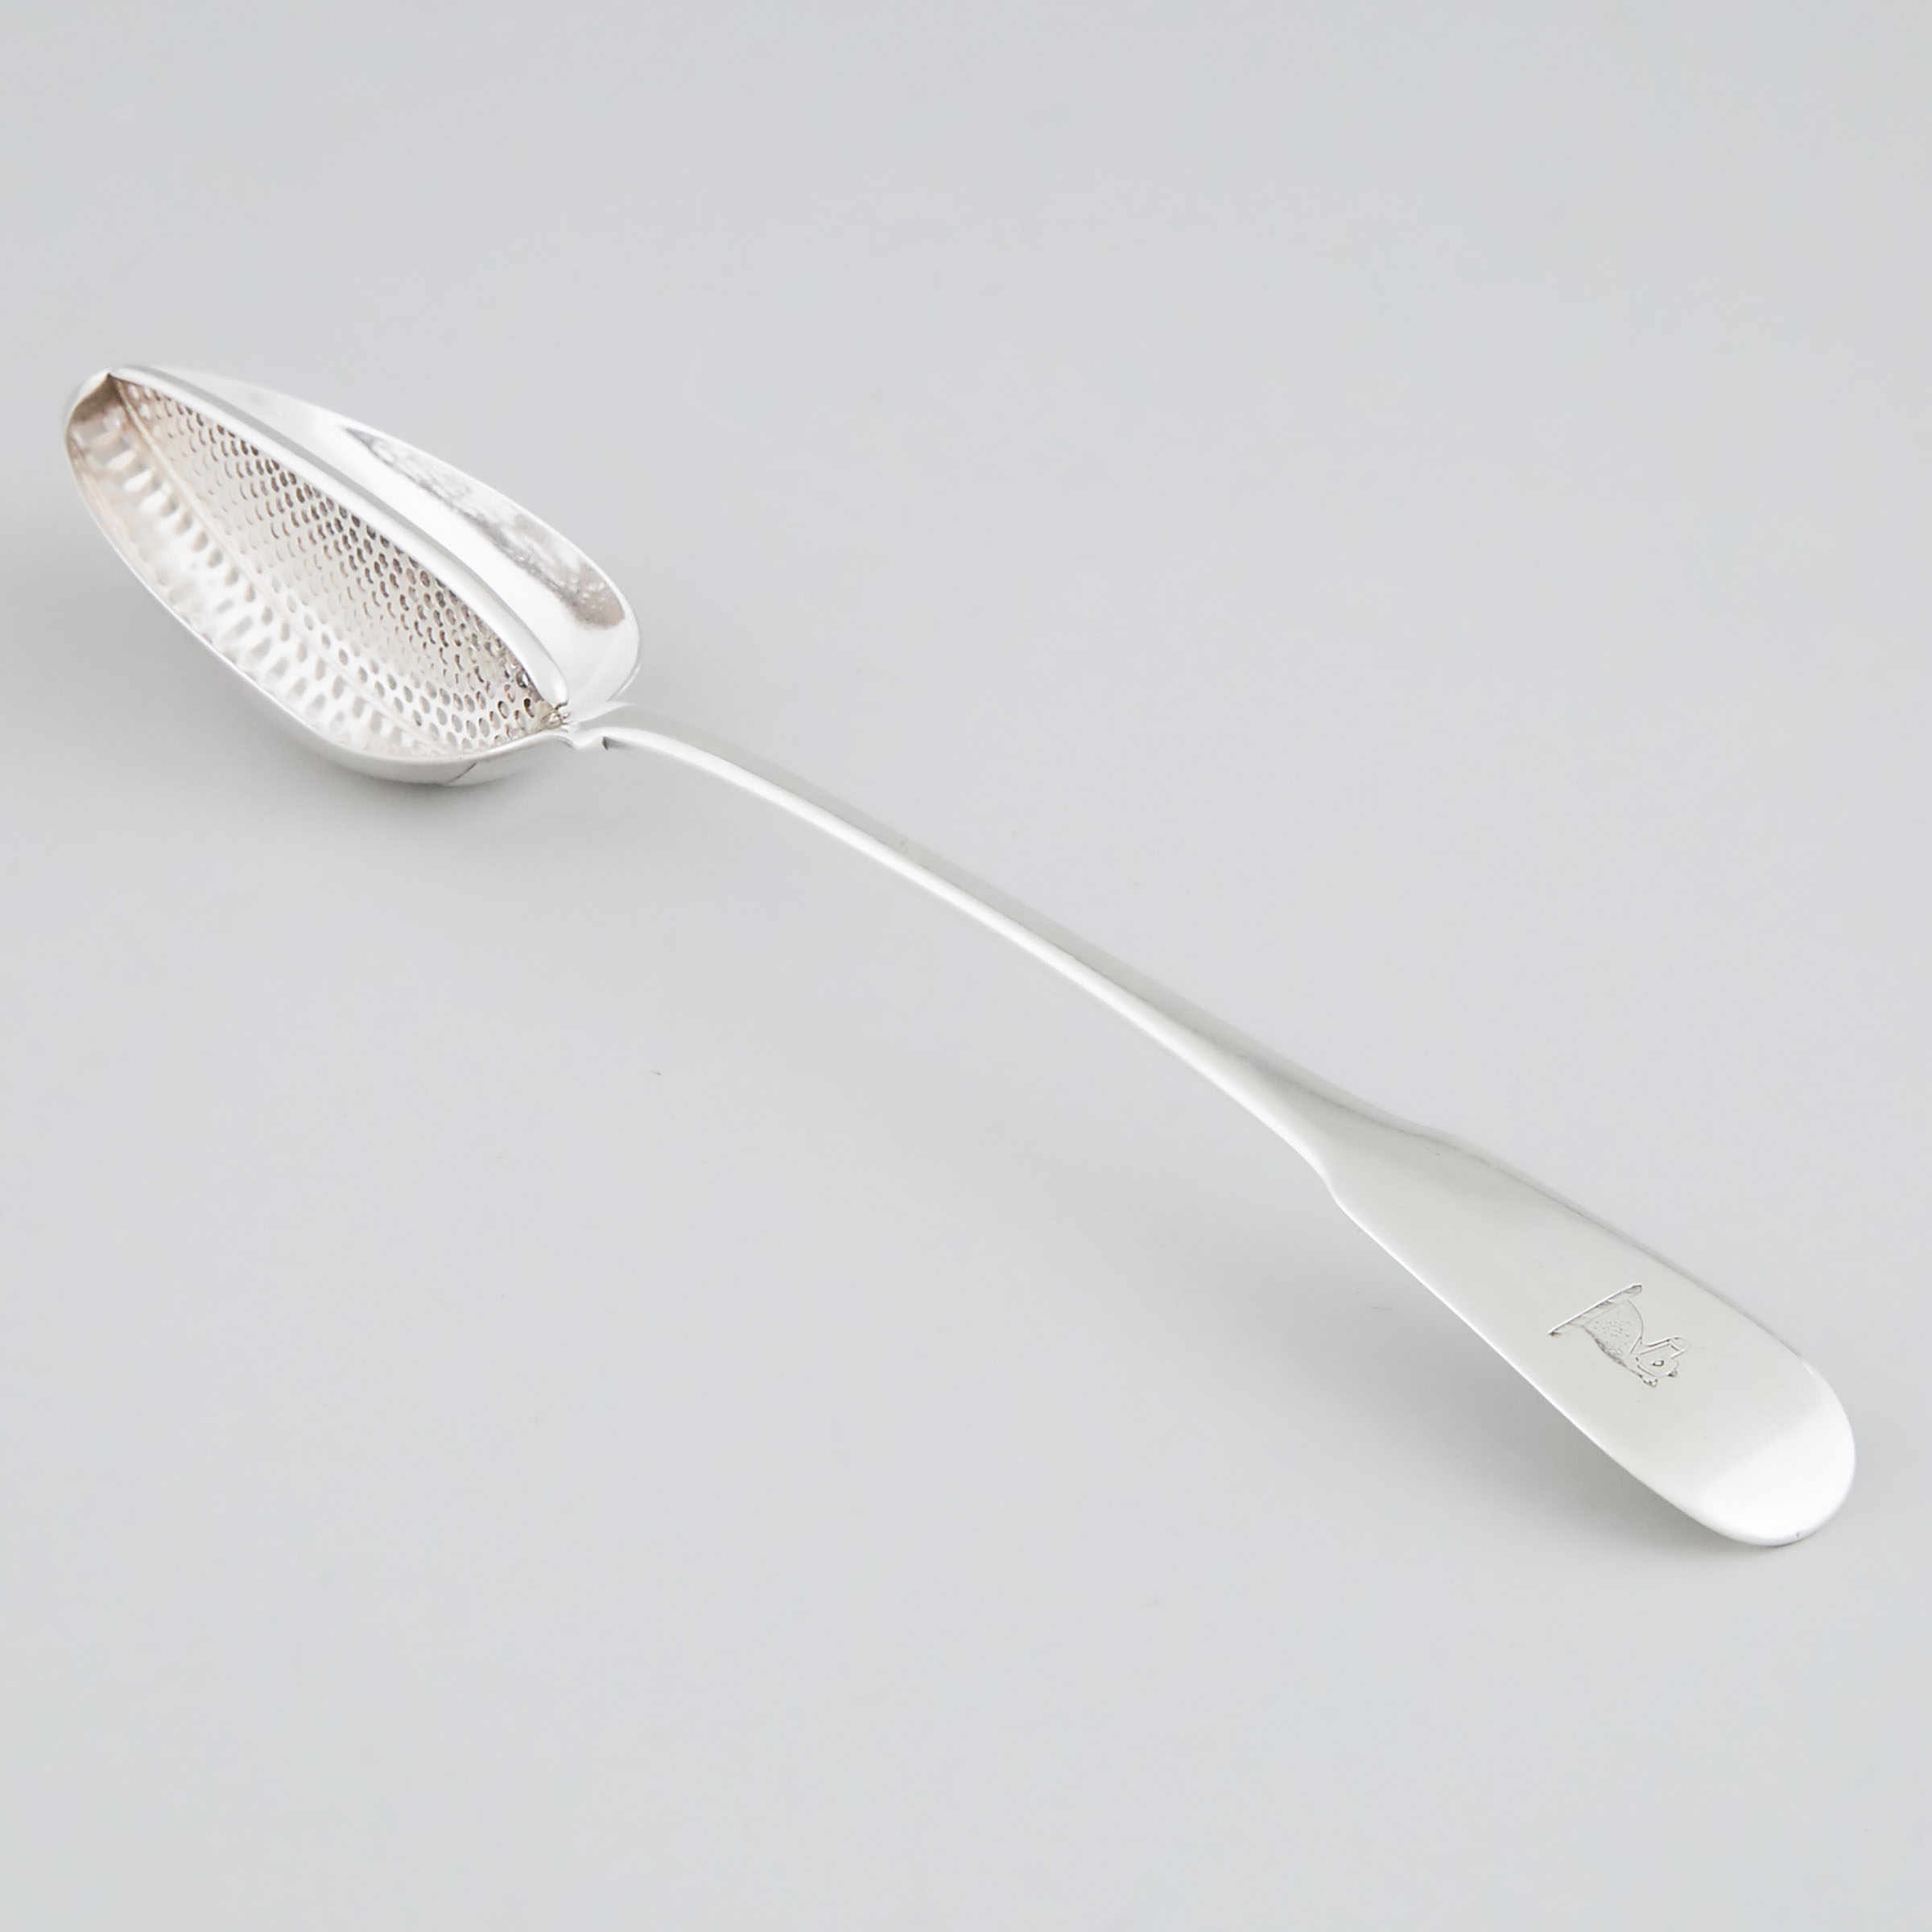 Indian Silver Fiddle Pattern Straining Serving Spoon, James Allan, Madras, c.1812-18